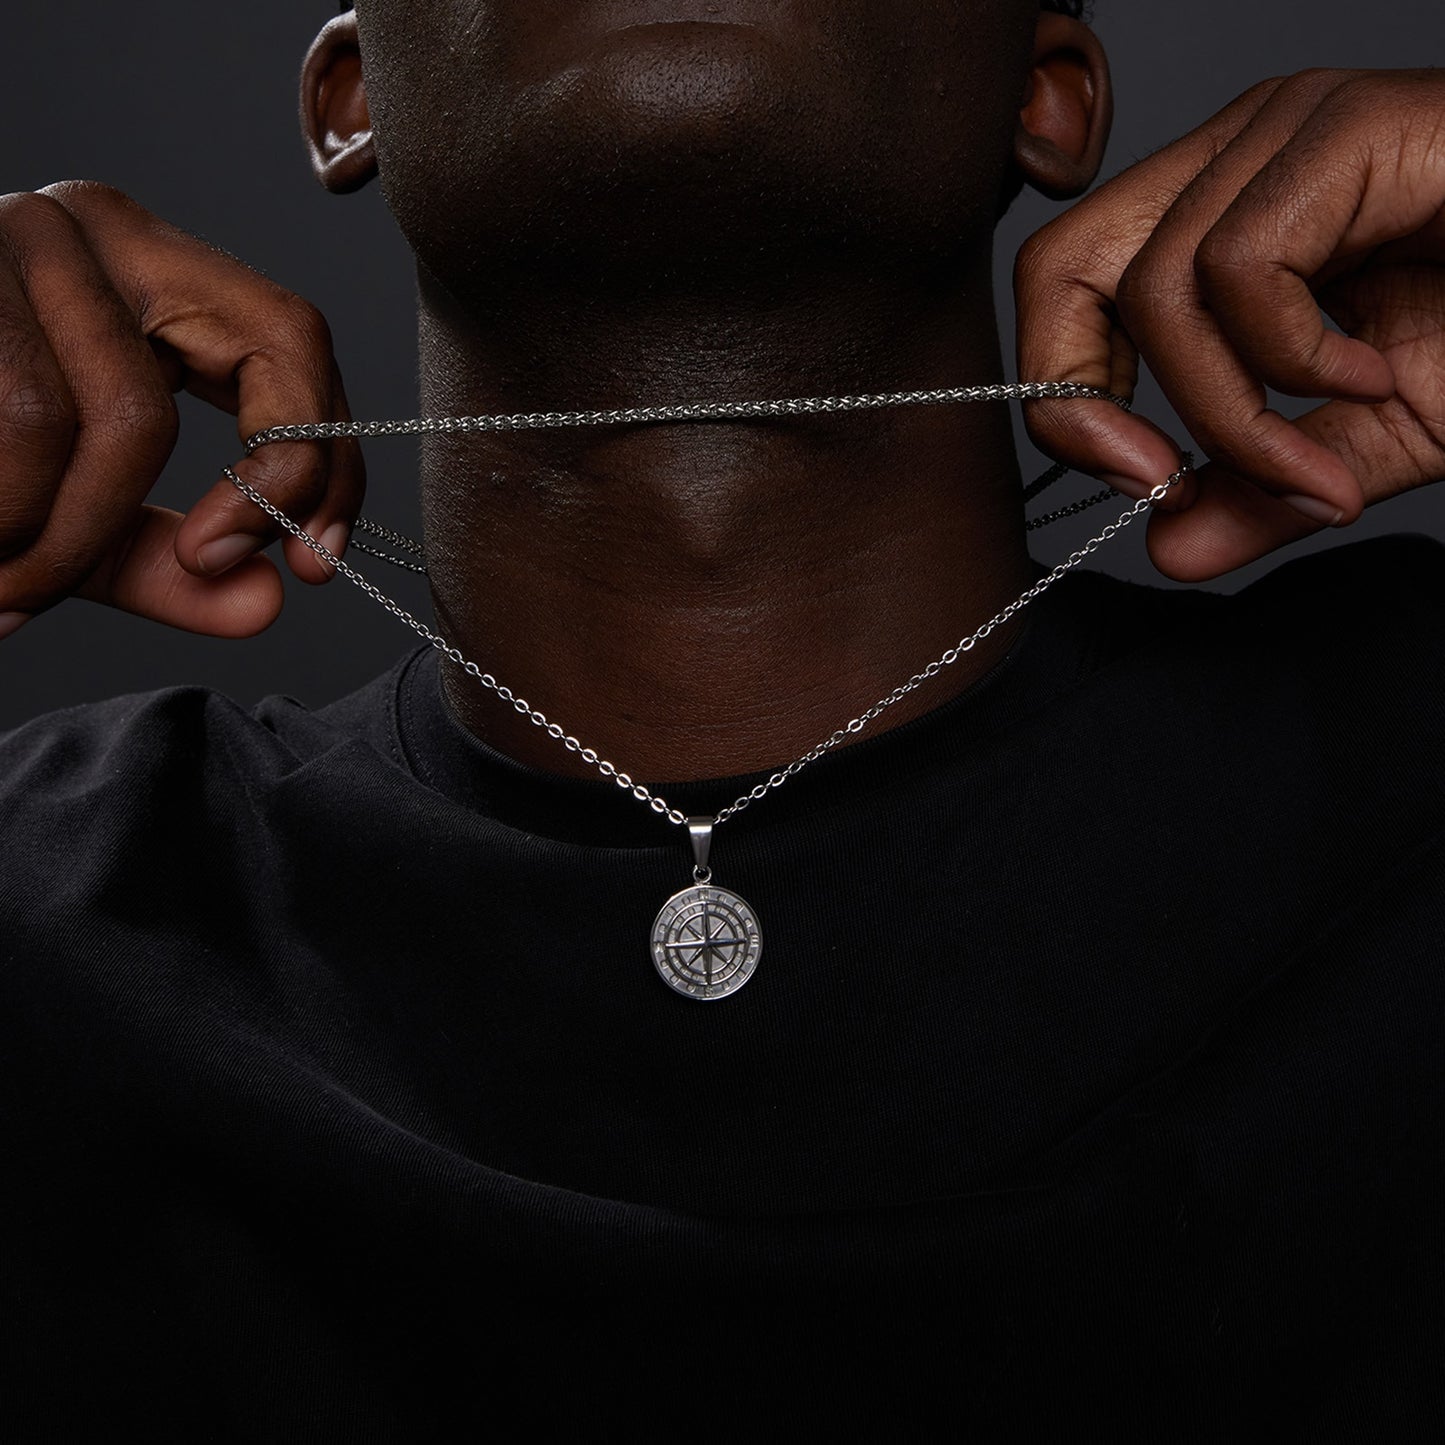 "Enhance Your Style:  Layered Necklaces for Men - Modern Design with Timeless Appeal"